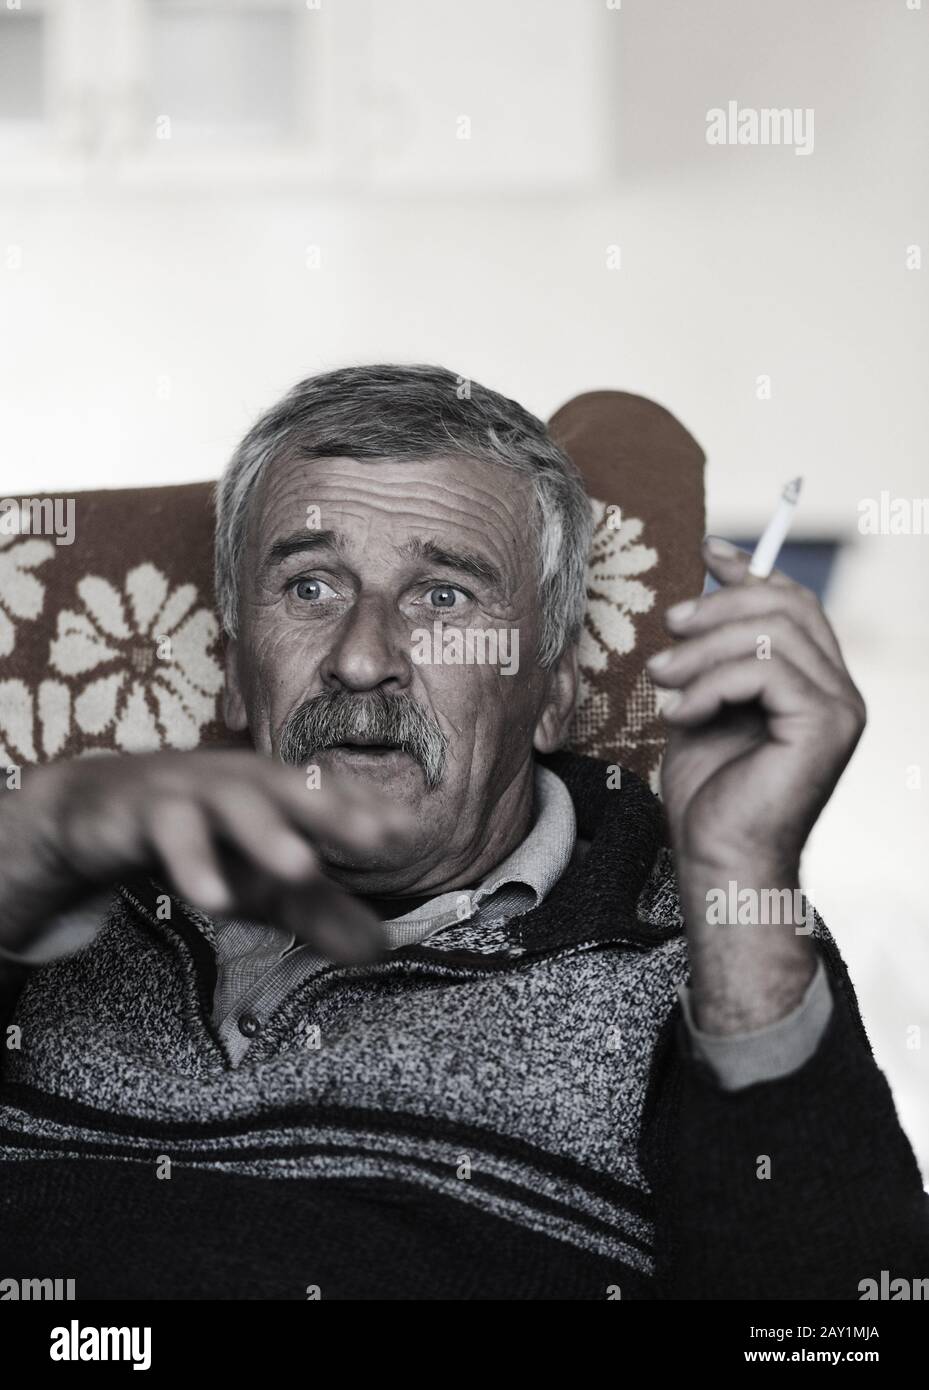 Old man with mustache smoking cigarette while sitting in sofa and speaking Stock Photo